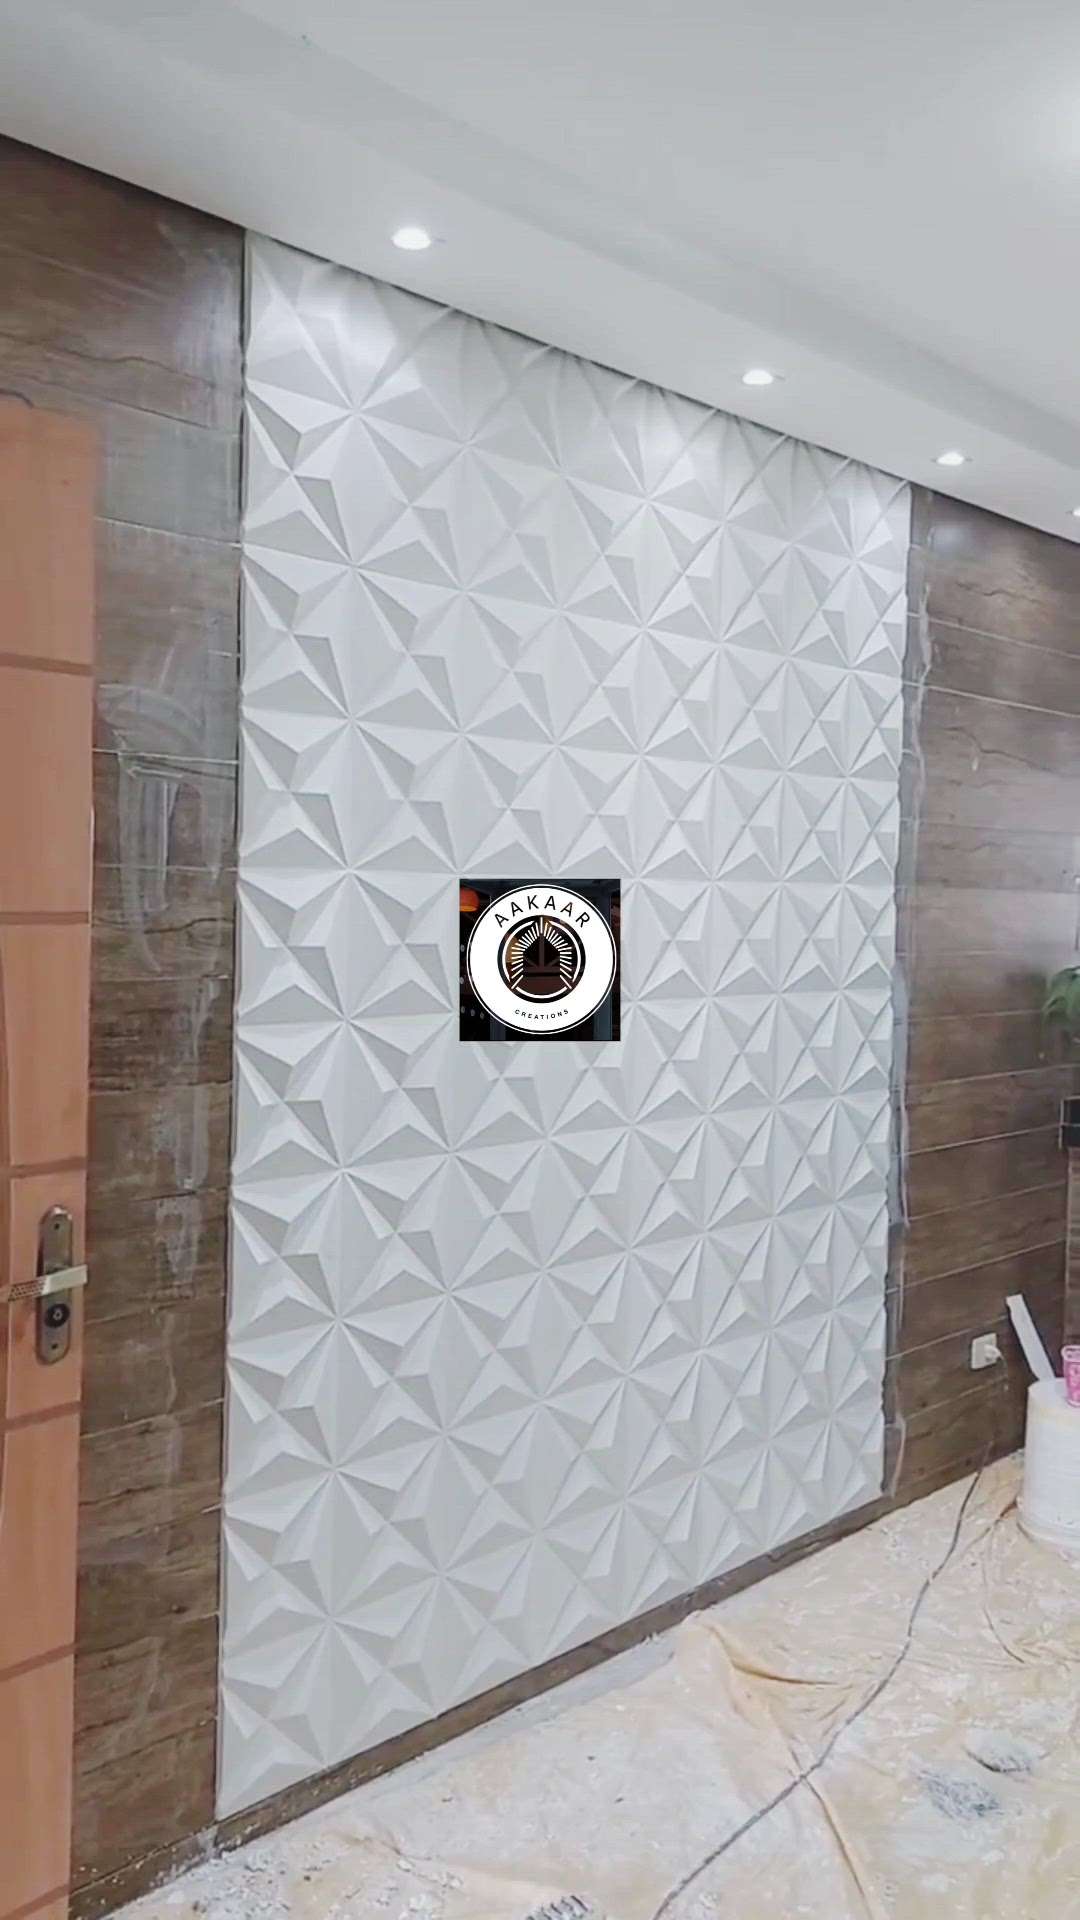 #3dgrgwallcladdings #3dwall  #3dwalldesign  #WallDecors  #WALL_PANELLING  #customized_wall  #GypsumCeiling  #WallDesigns  #interiors  #luxuryinteriors  #grg  #wallcladding  #Mordern #wallpanels #designdeinteriores #designinspiration #indianarchitecture #indiandesigncommunity #mordernarchitecture #bhopalarchitecture #bhopalarchitect#all